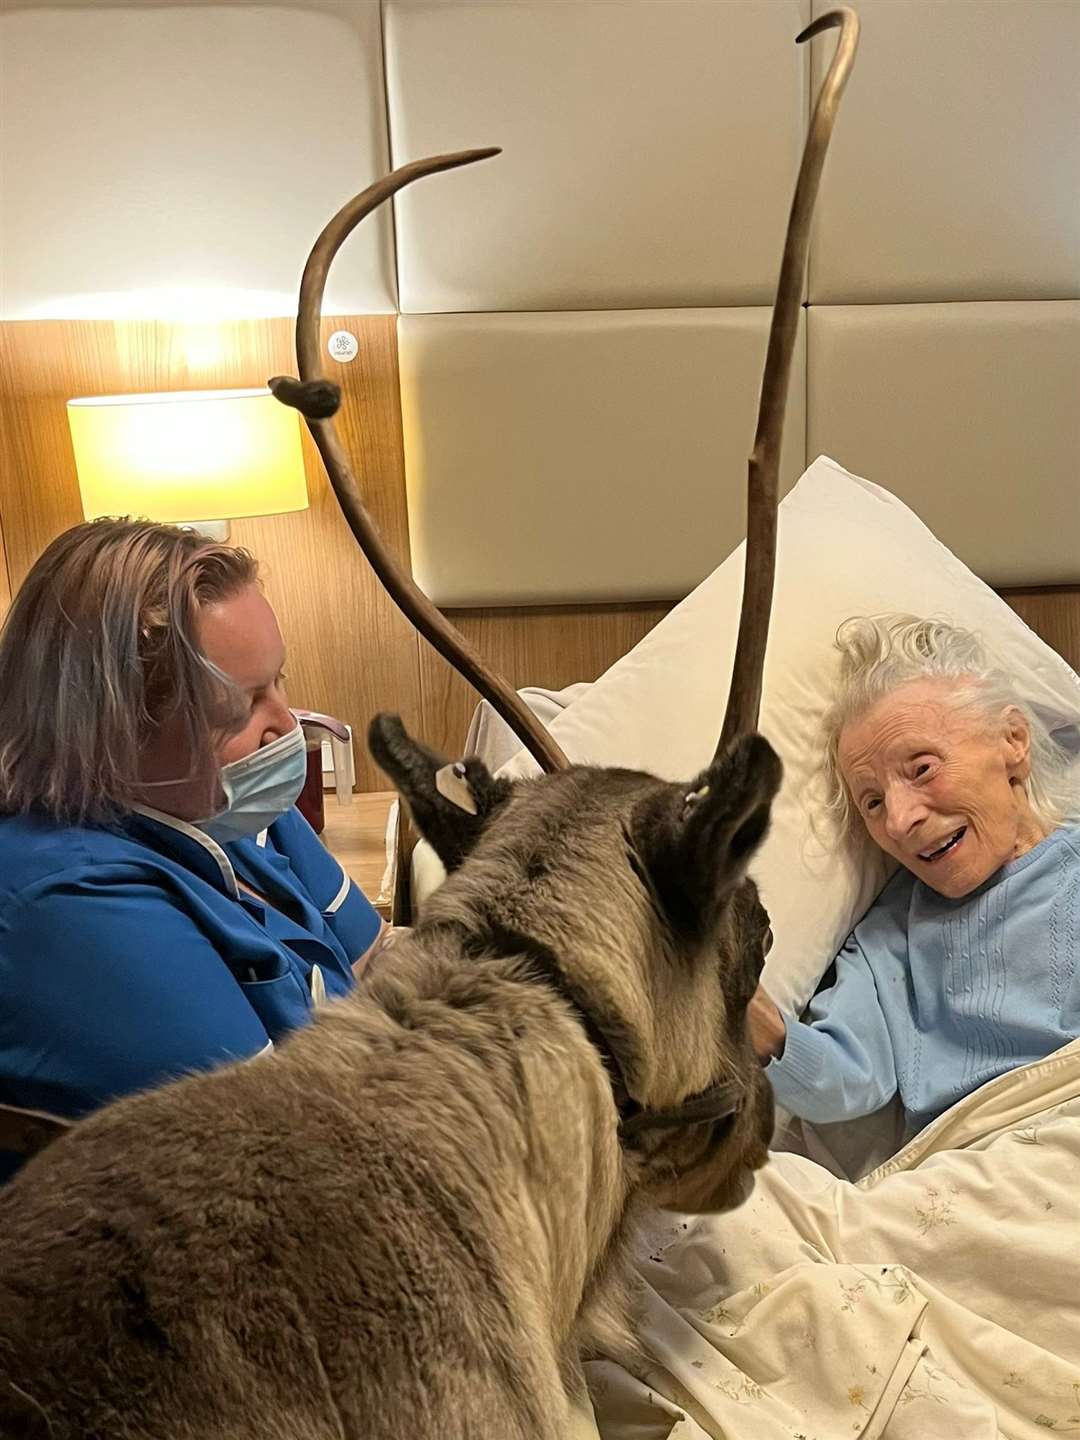 Elsie Hodge, 95, got a surprise visit from two reindeer. Picture: Heathfield Court care home